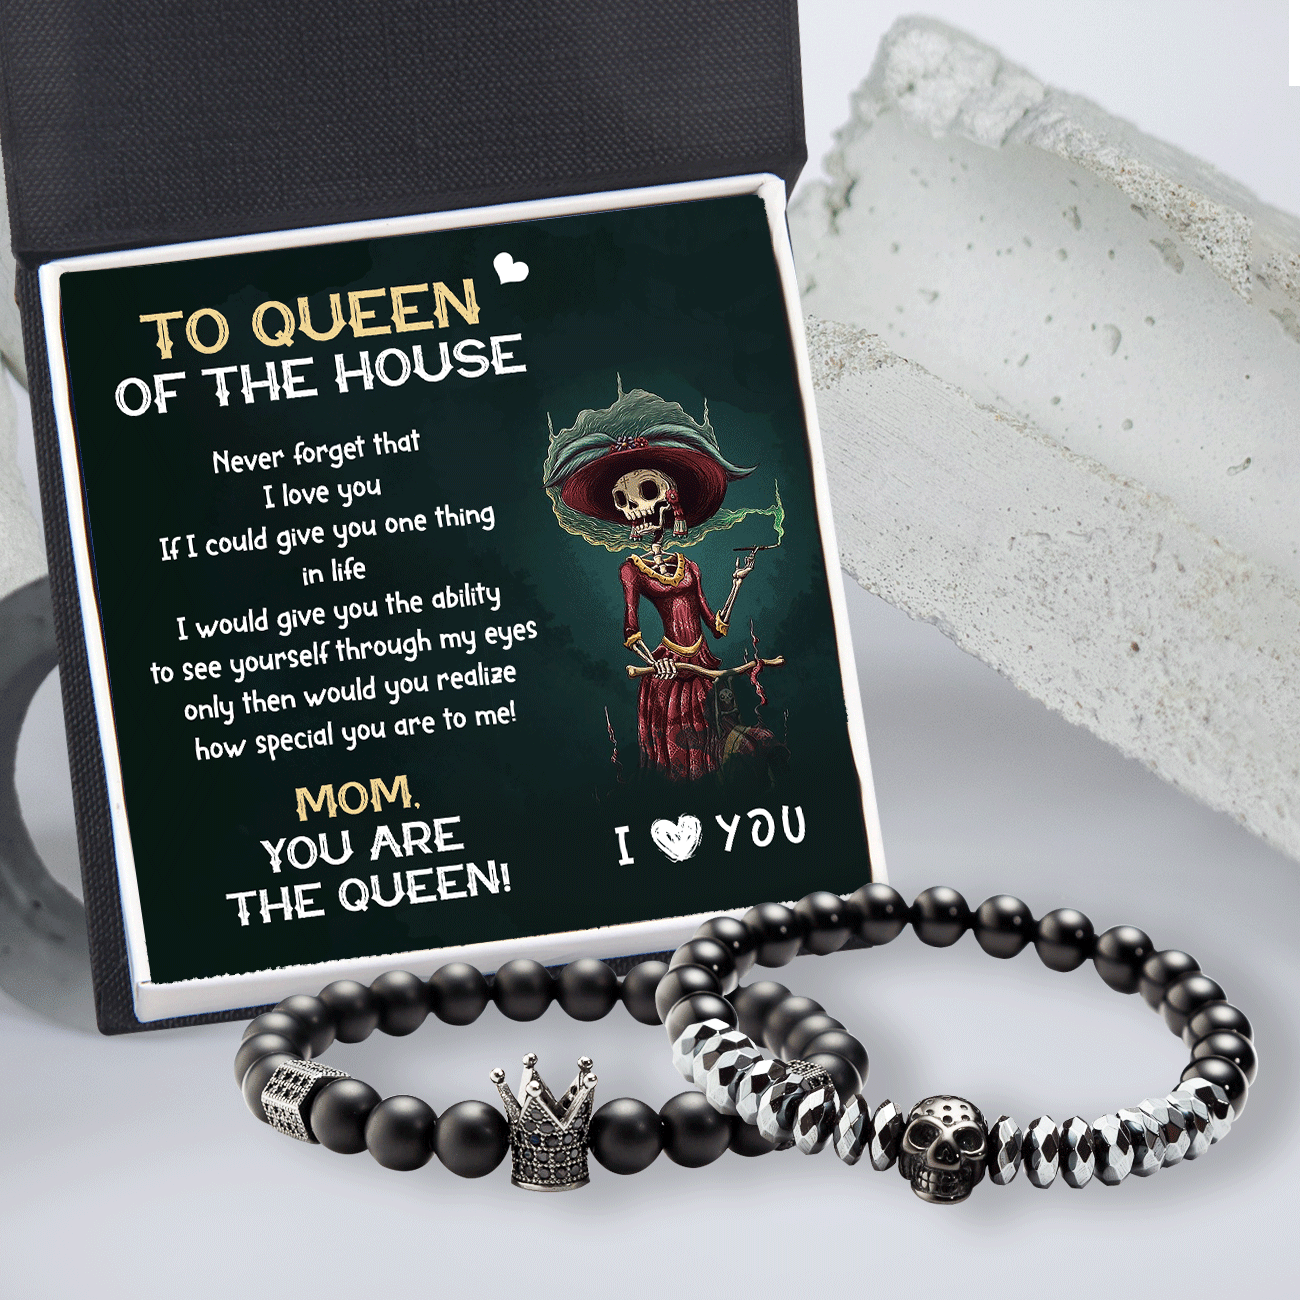 Couple Crown and Skull Bracelets - Skull - To Queen Of The House - How Special You Are To Me - Gbu19008